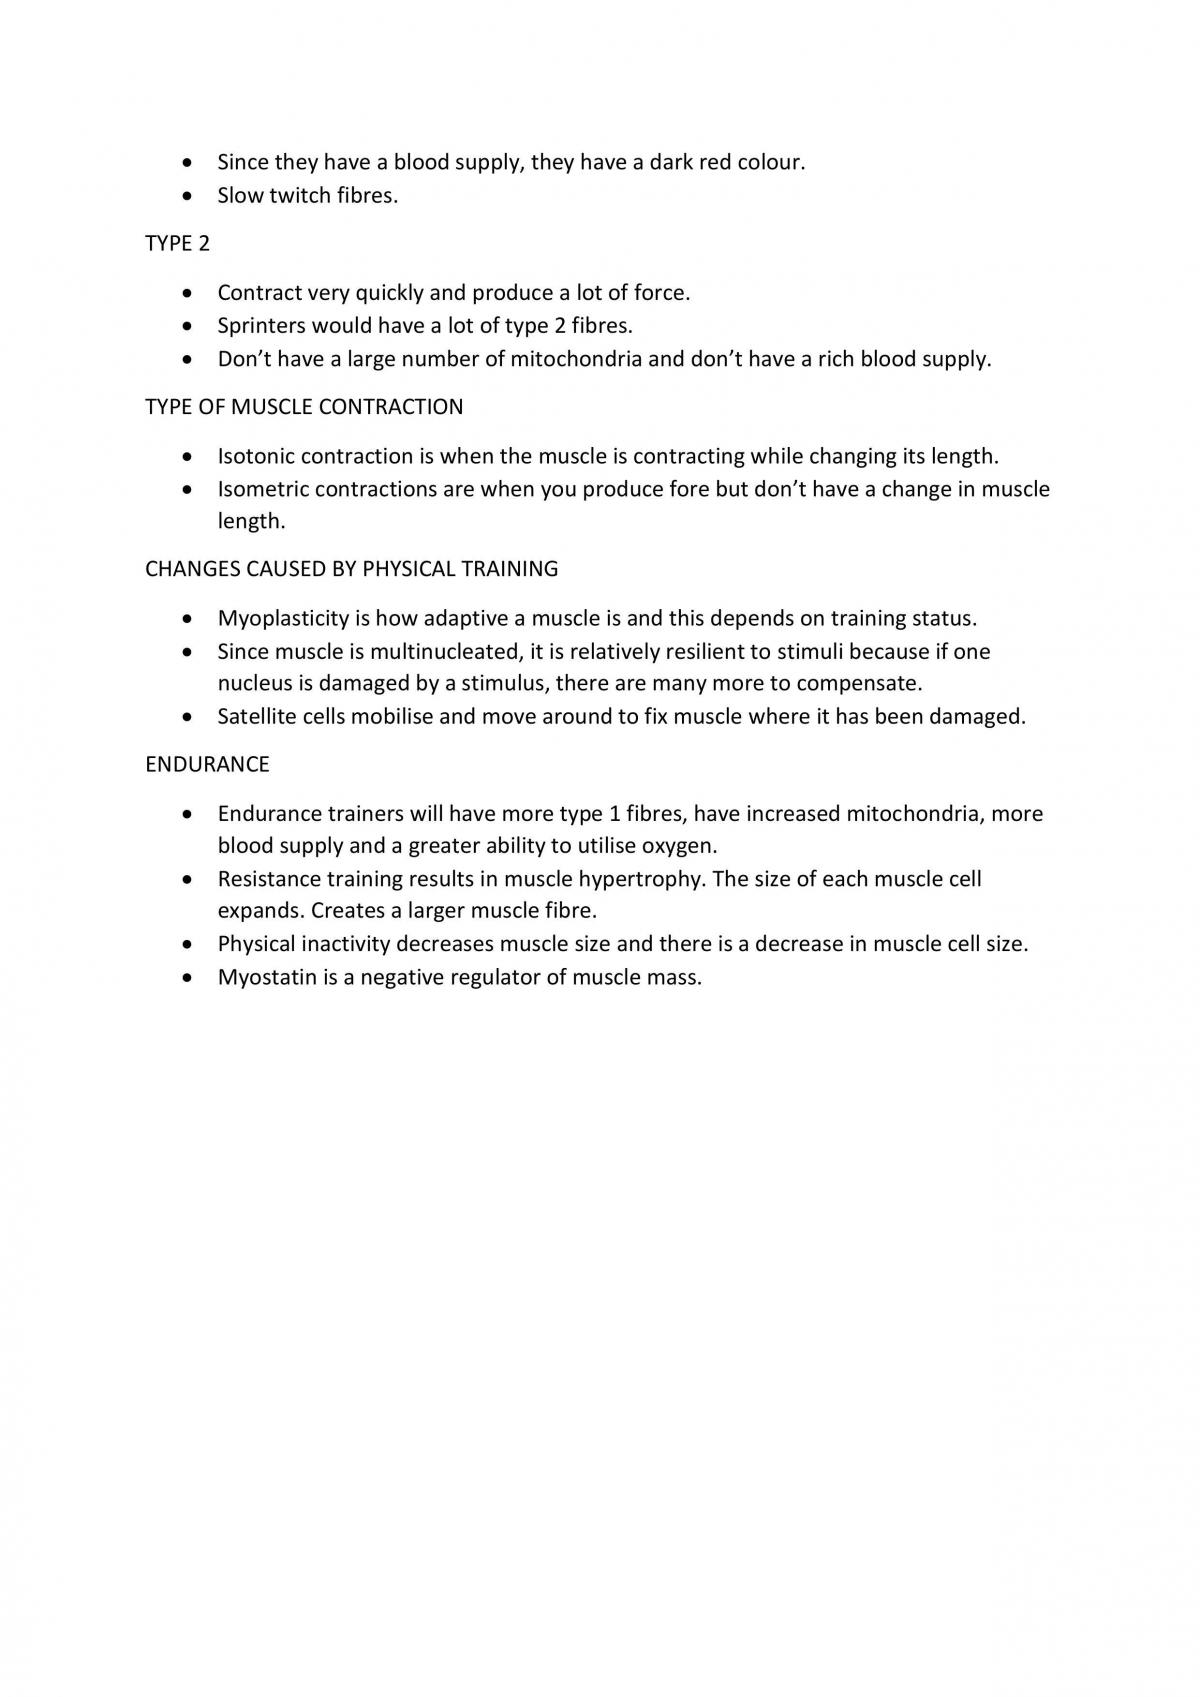 301353 Study Notes - Page 39